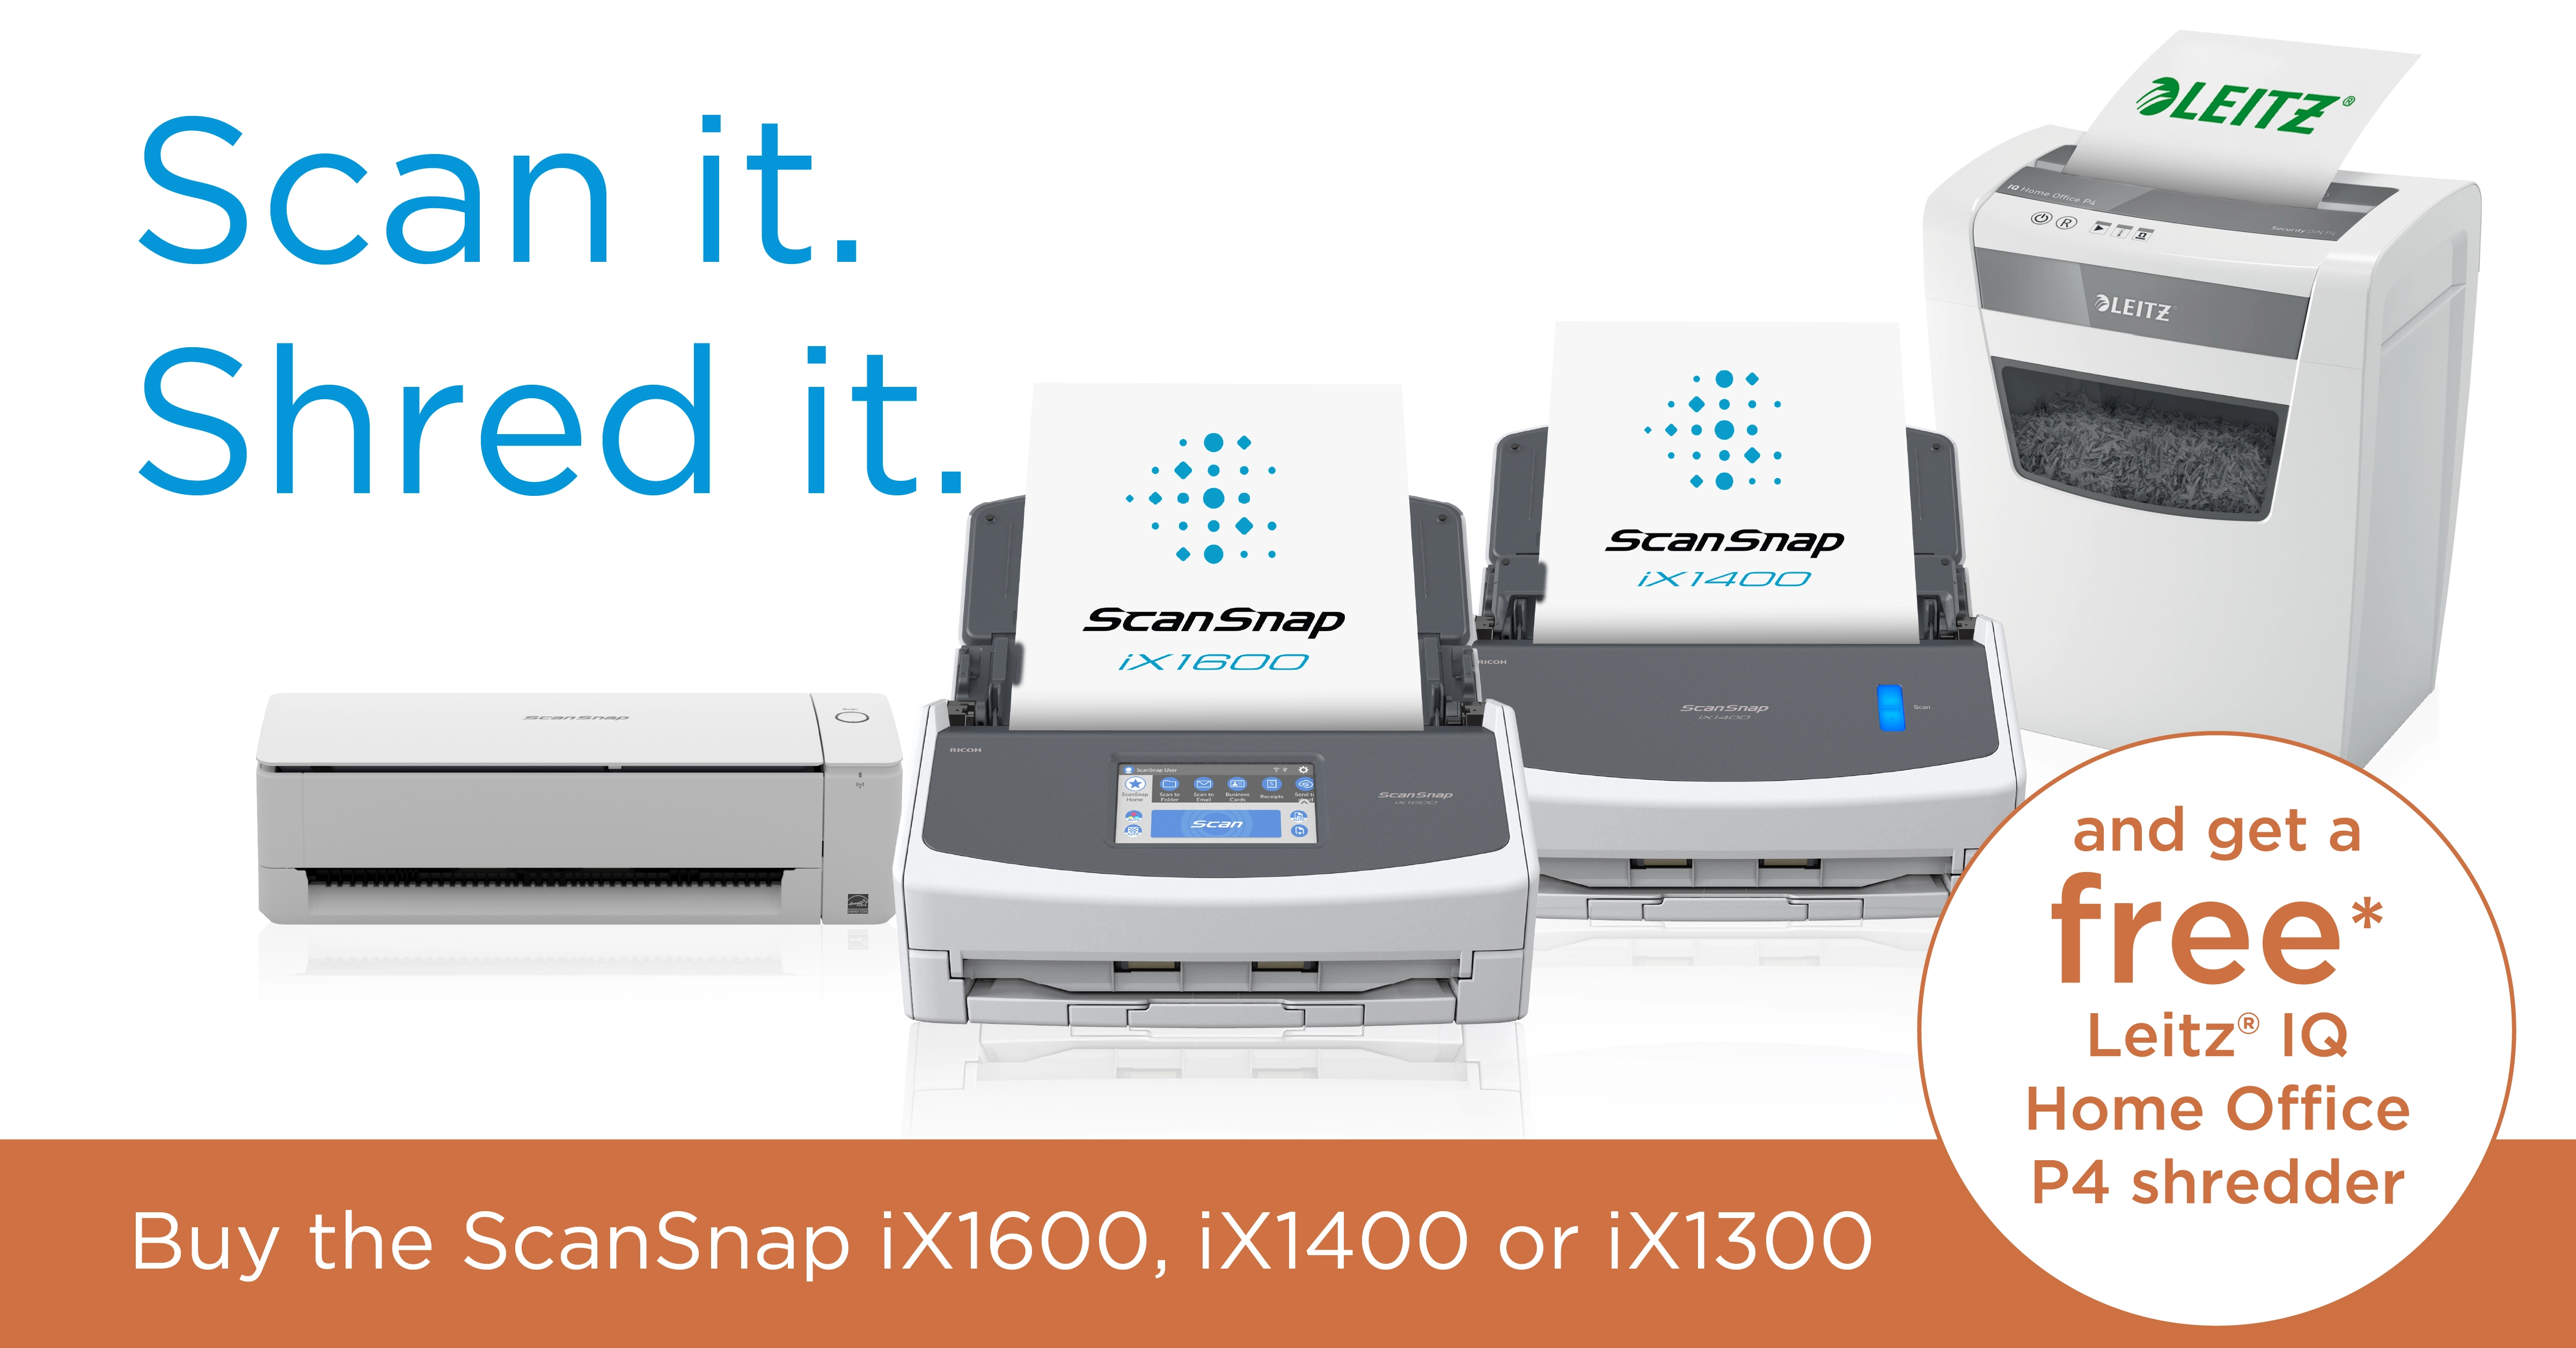 ScanSnap free shredder promotion with an iX1600, iX1400 or iX1300 scanner